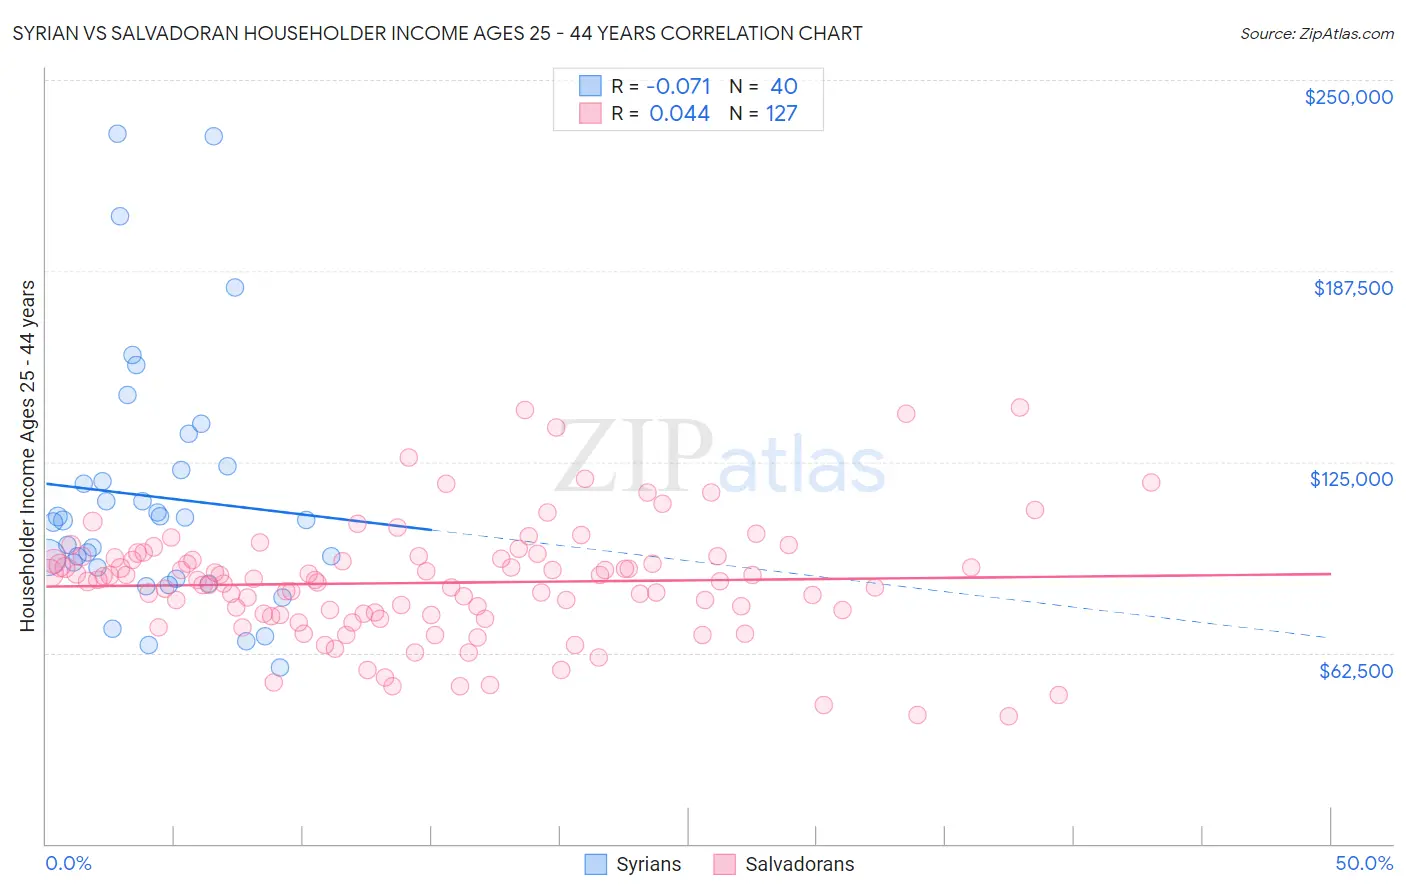 Syrian vs Salvadoran Householder Income Ages 25 - 44 years